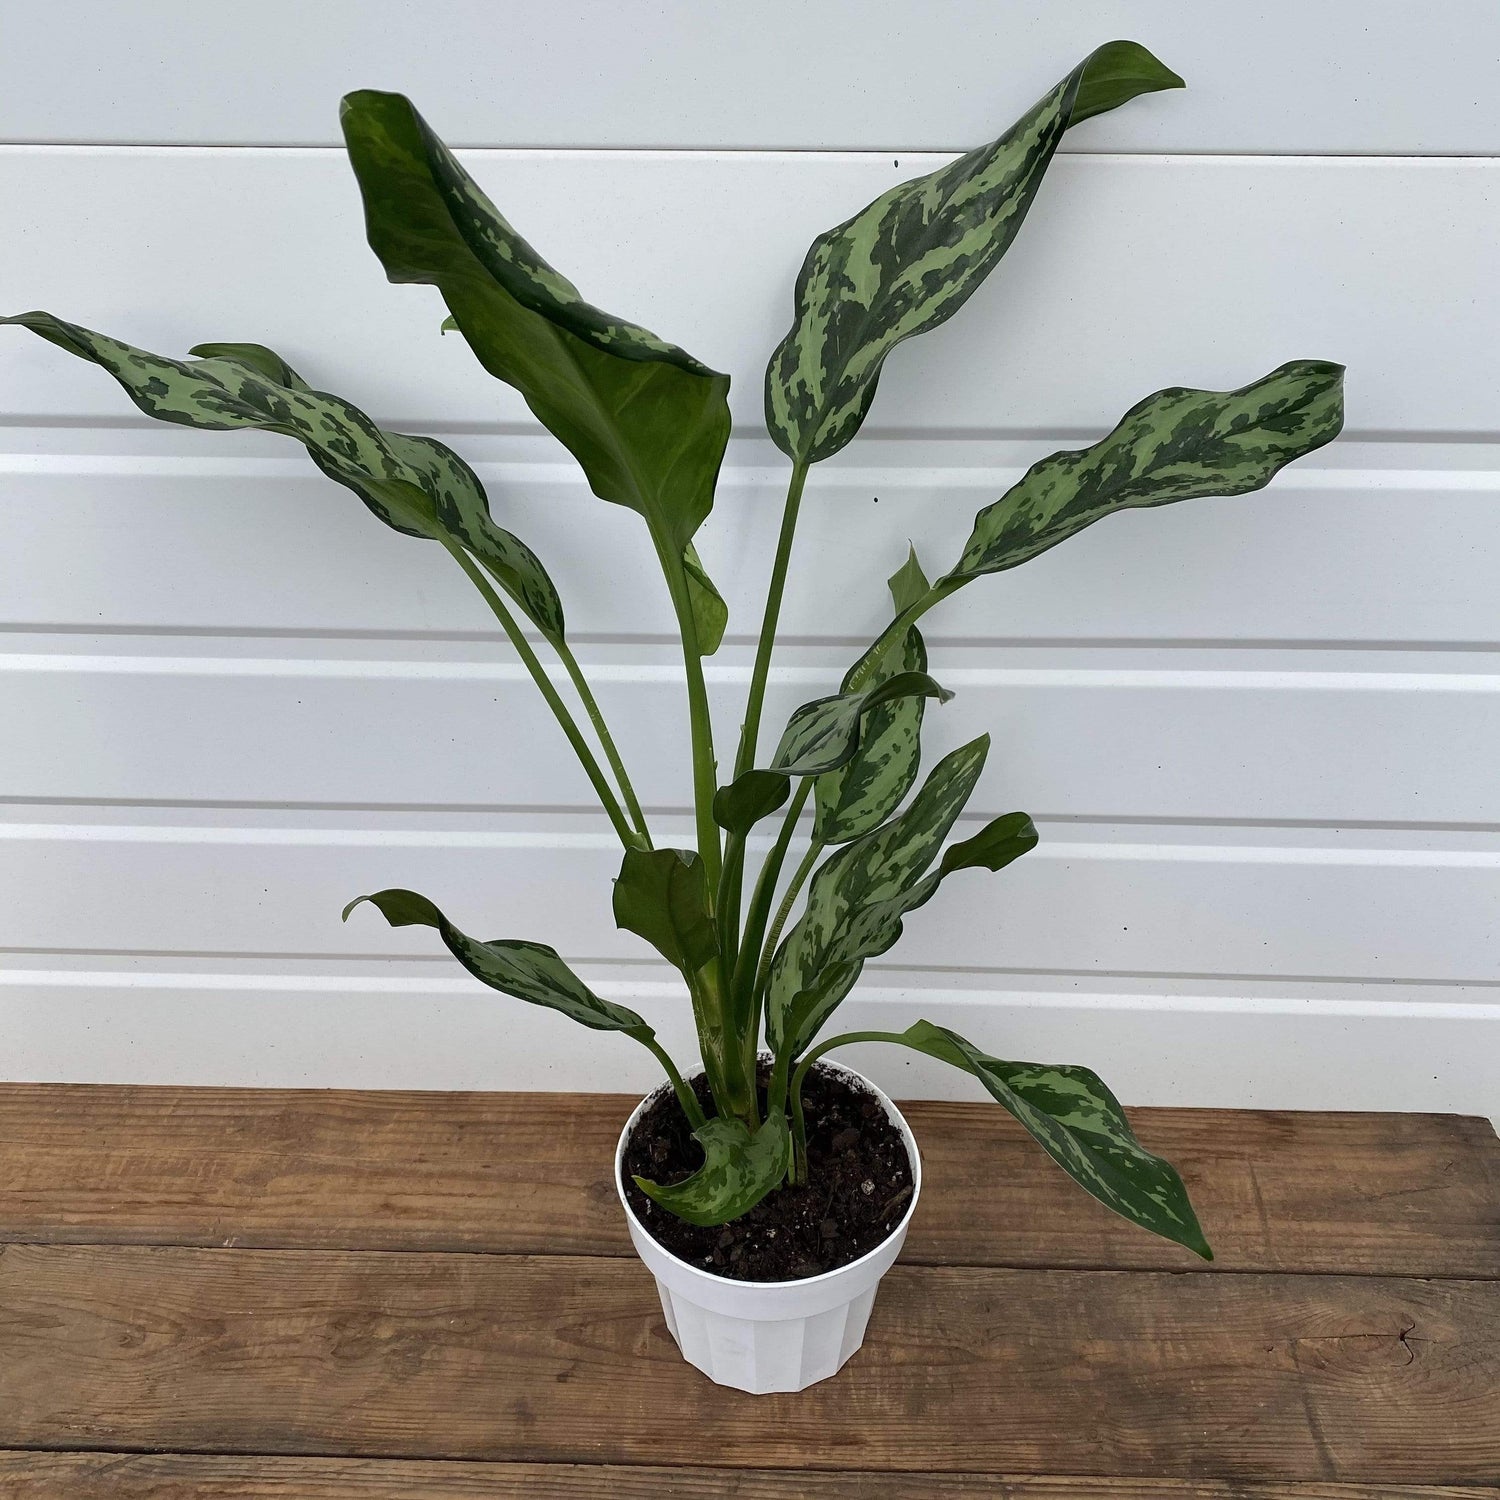 Chinese Evergreen 'Juliette' - Urban Sprouts